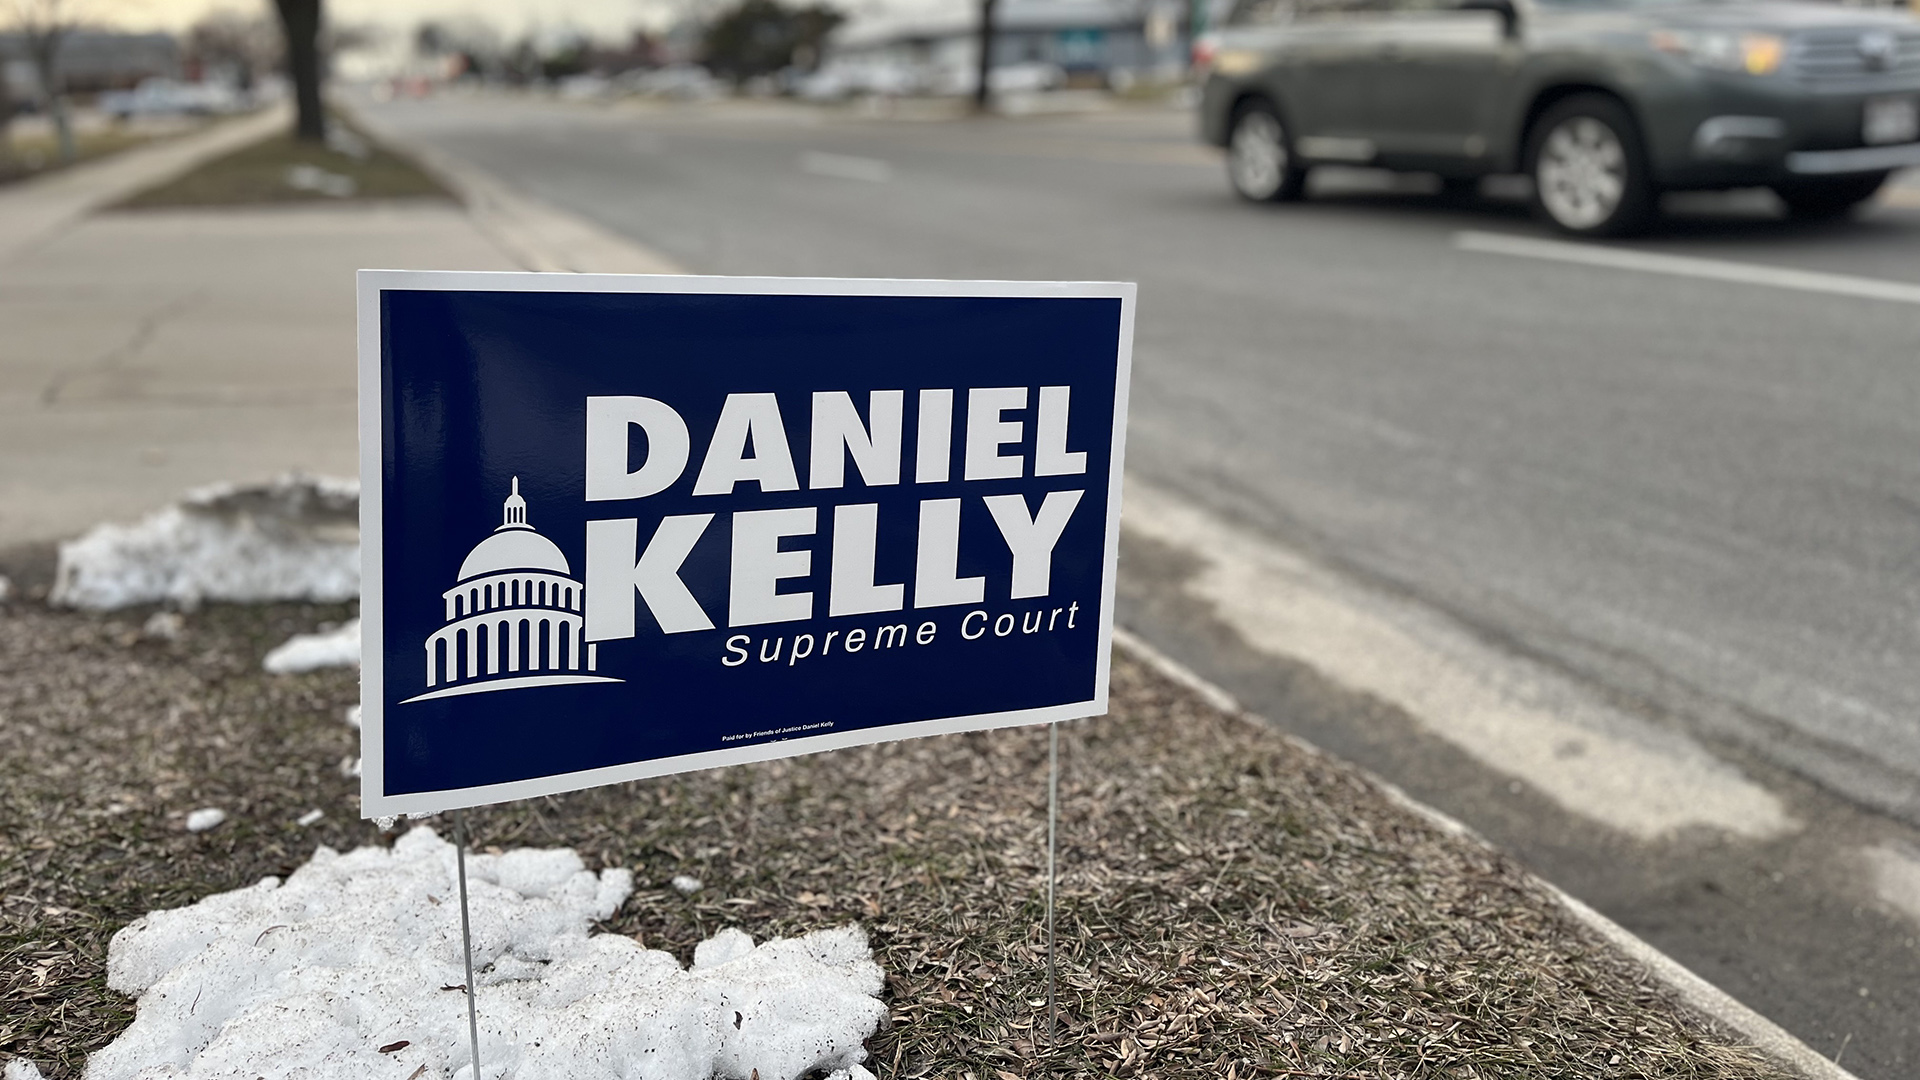 A campaign yard sign with a Capitol dome graphic and the words "Daniel Kelly" and "Supreme Court" stands in a grass median between a street and sidewalk, with a driveway, driving car, buildings and trees in the background.